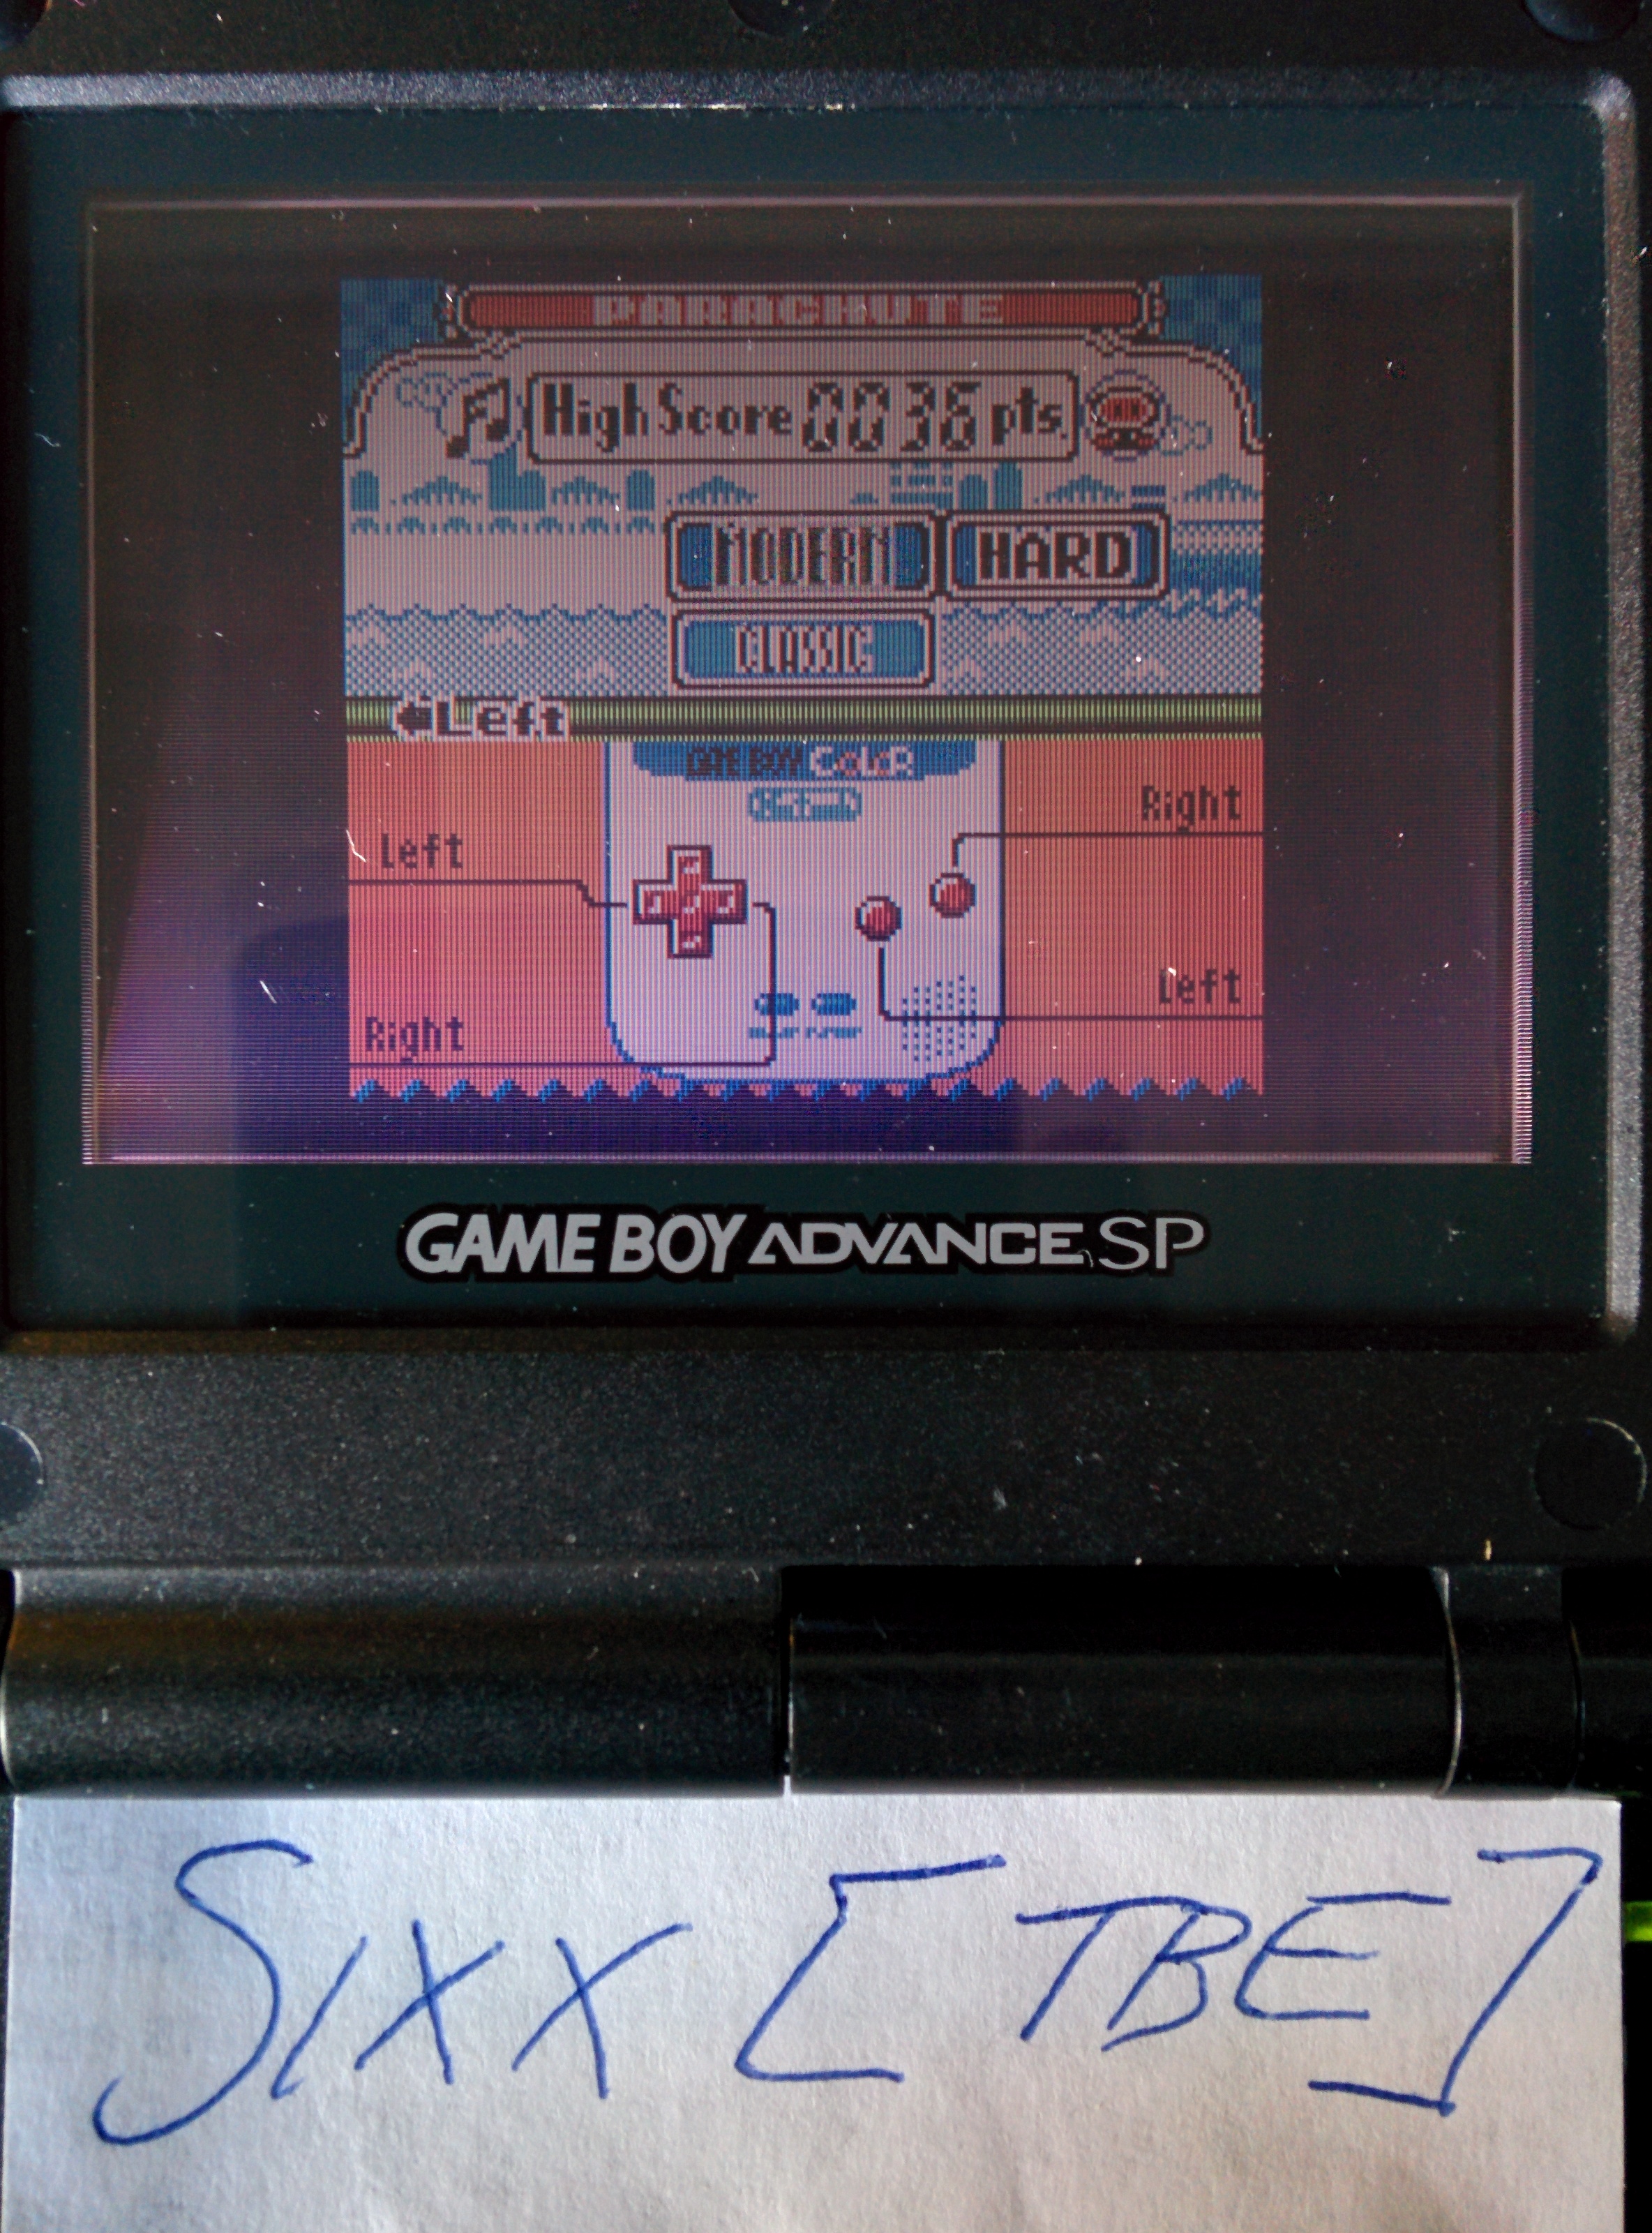 Sixx: Game & Watch Gallery 2: Parachute: Modern: Hard (Game Boy Color) 36 points on 2014-08-30 08:18:07